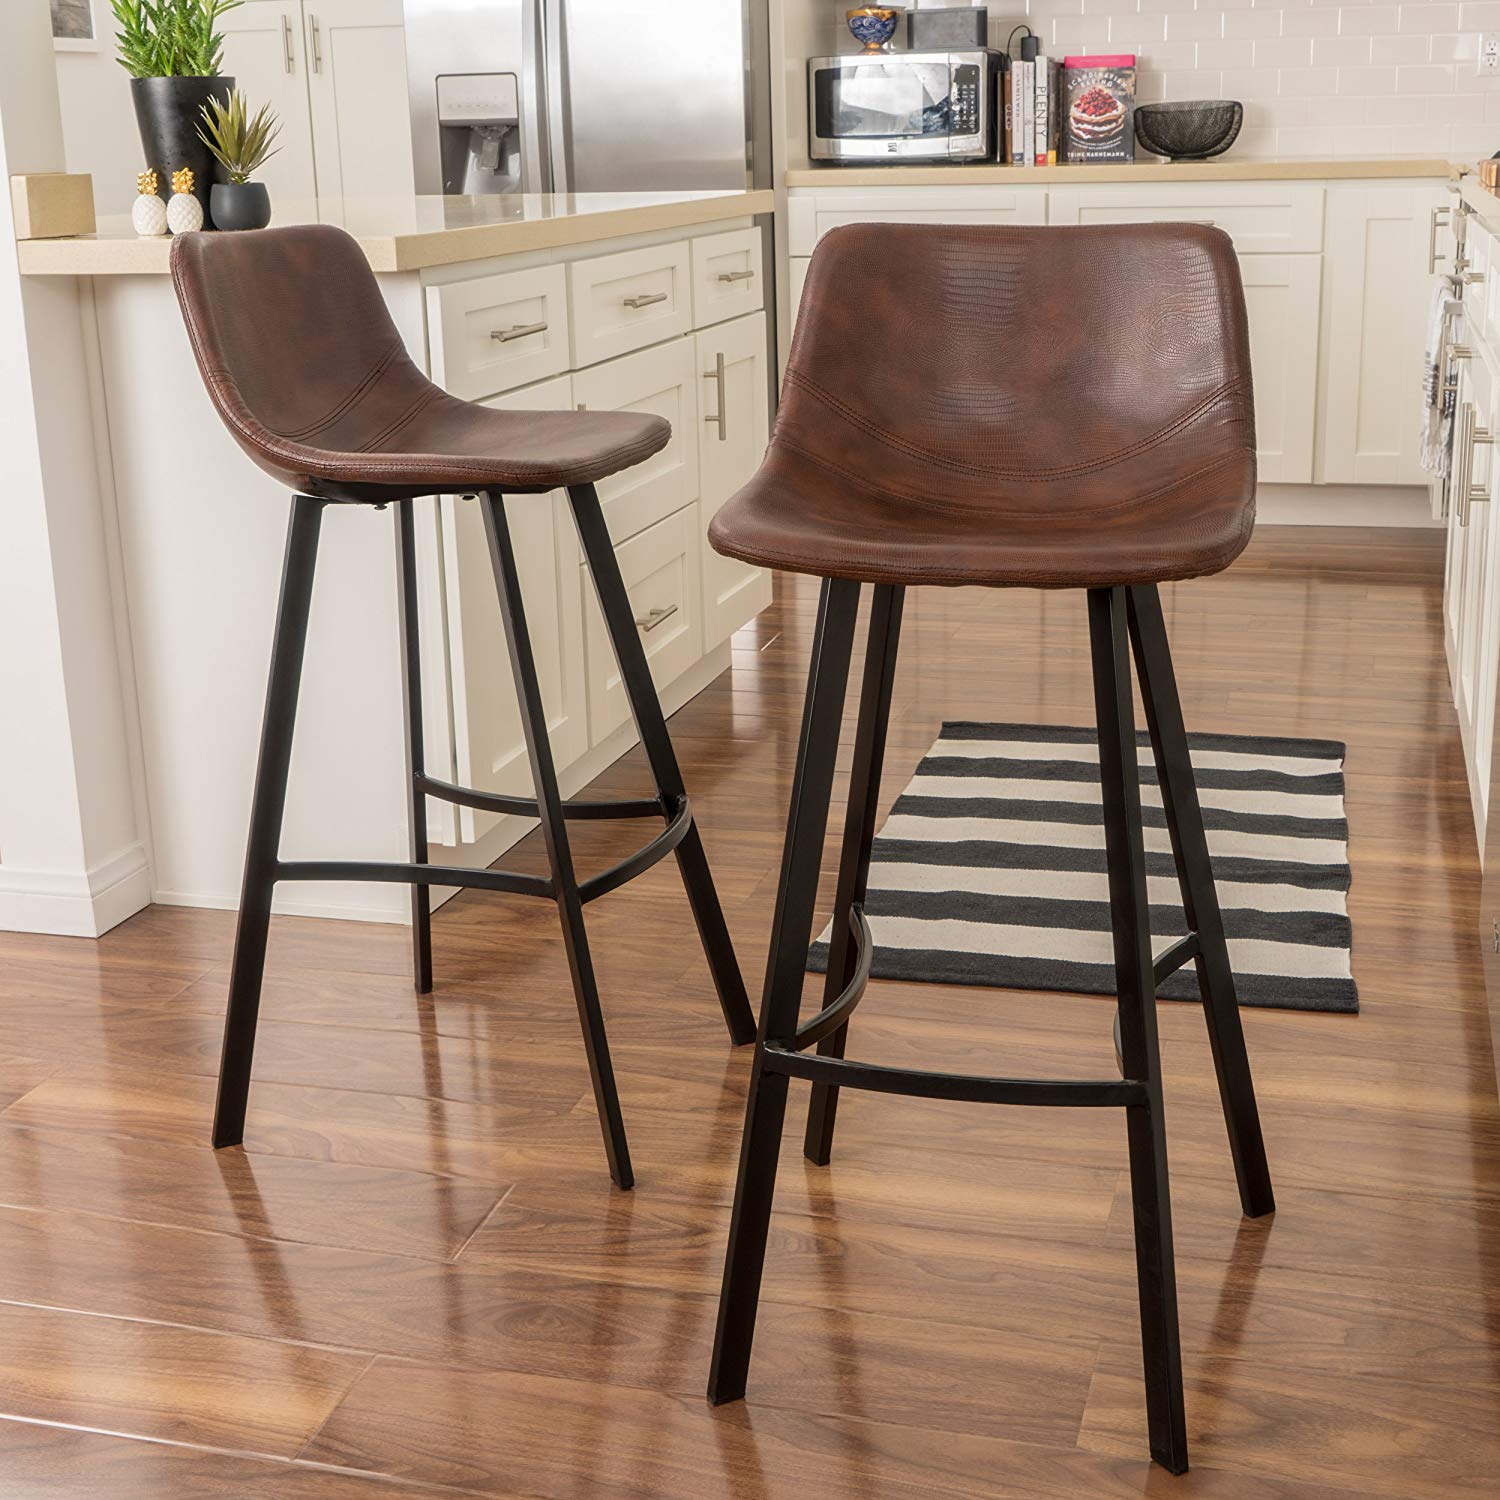 The Top 10 Best Bar Stools Of 2021, Best Bar Stools For Hardwood Floors